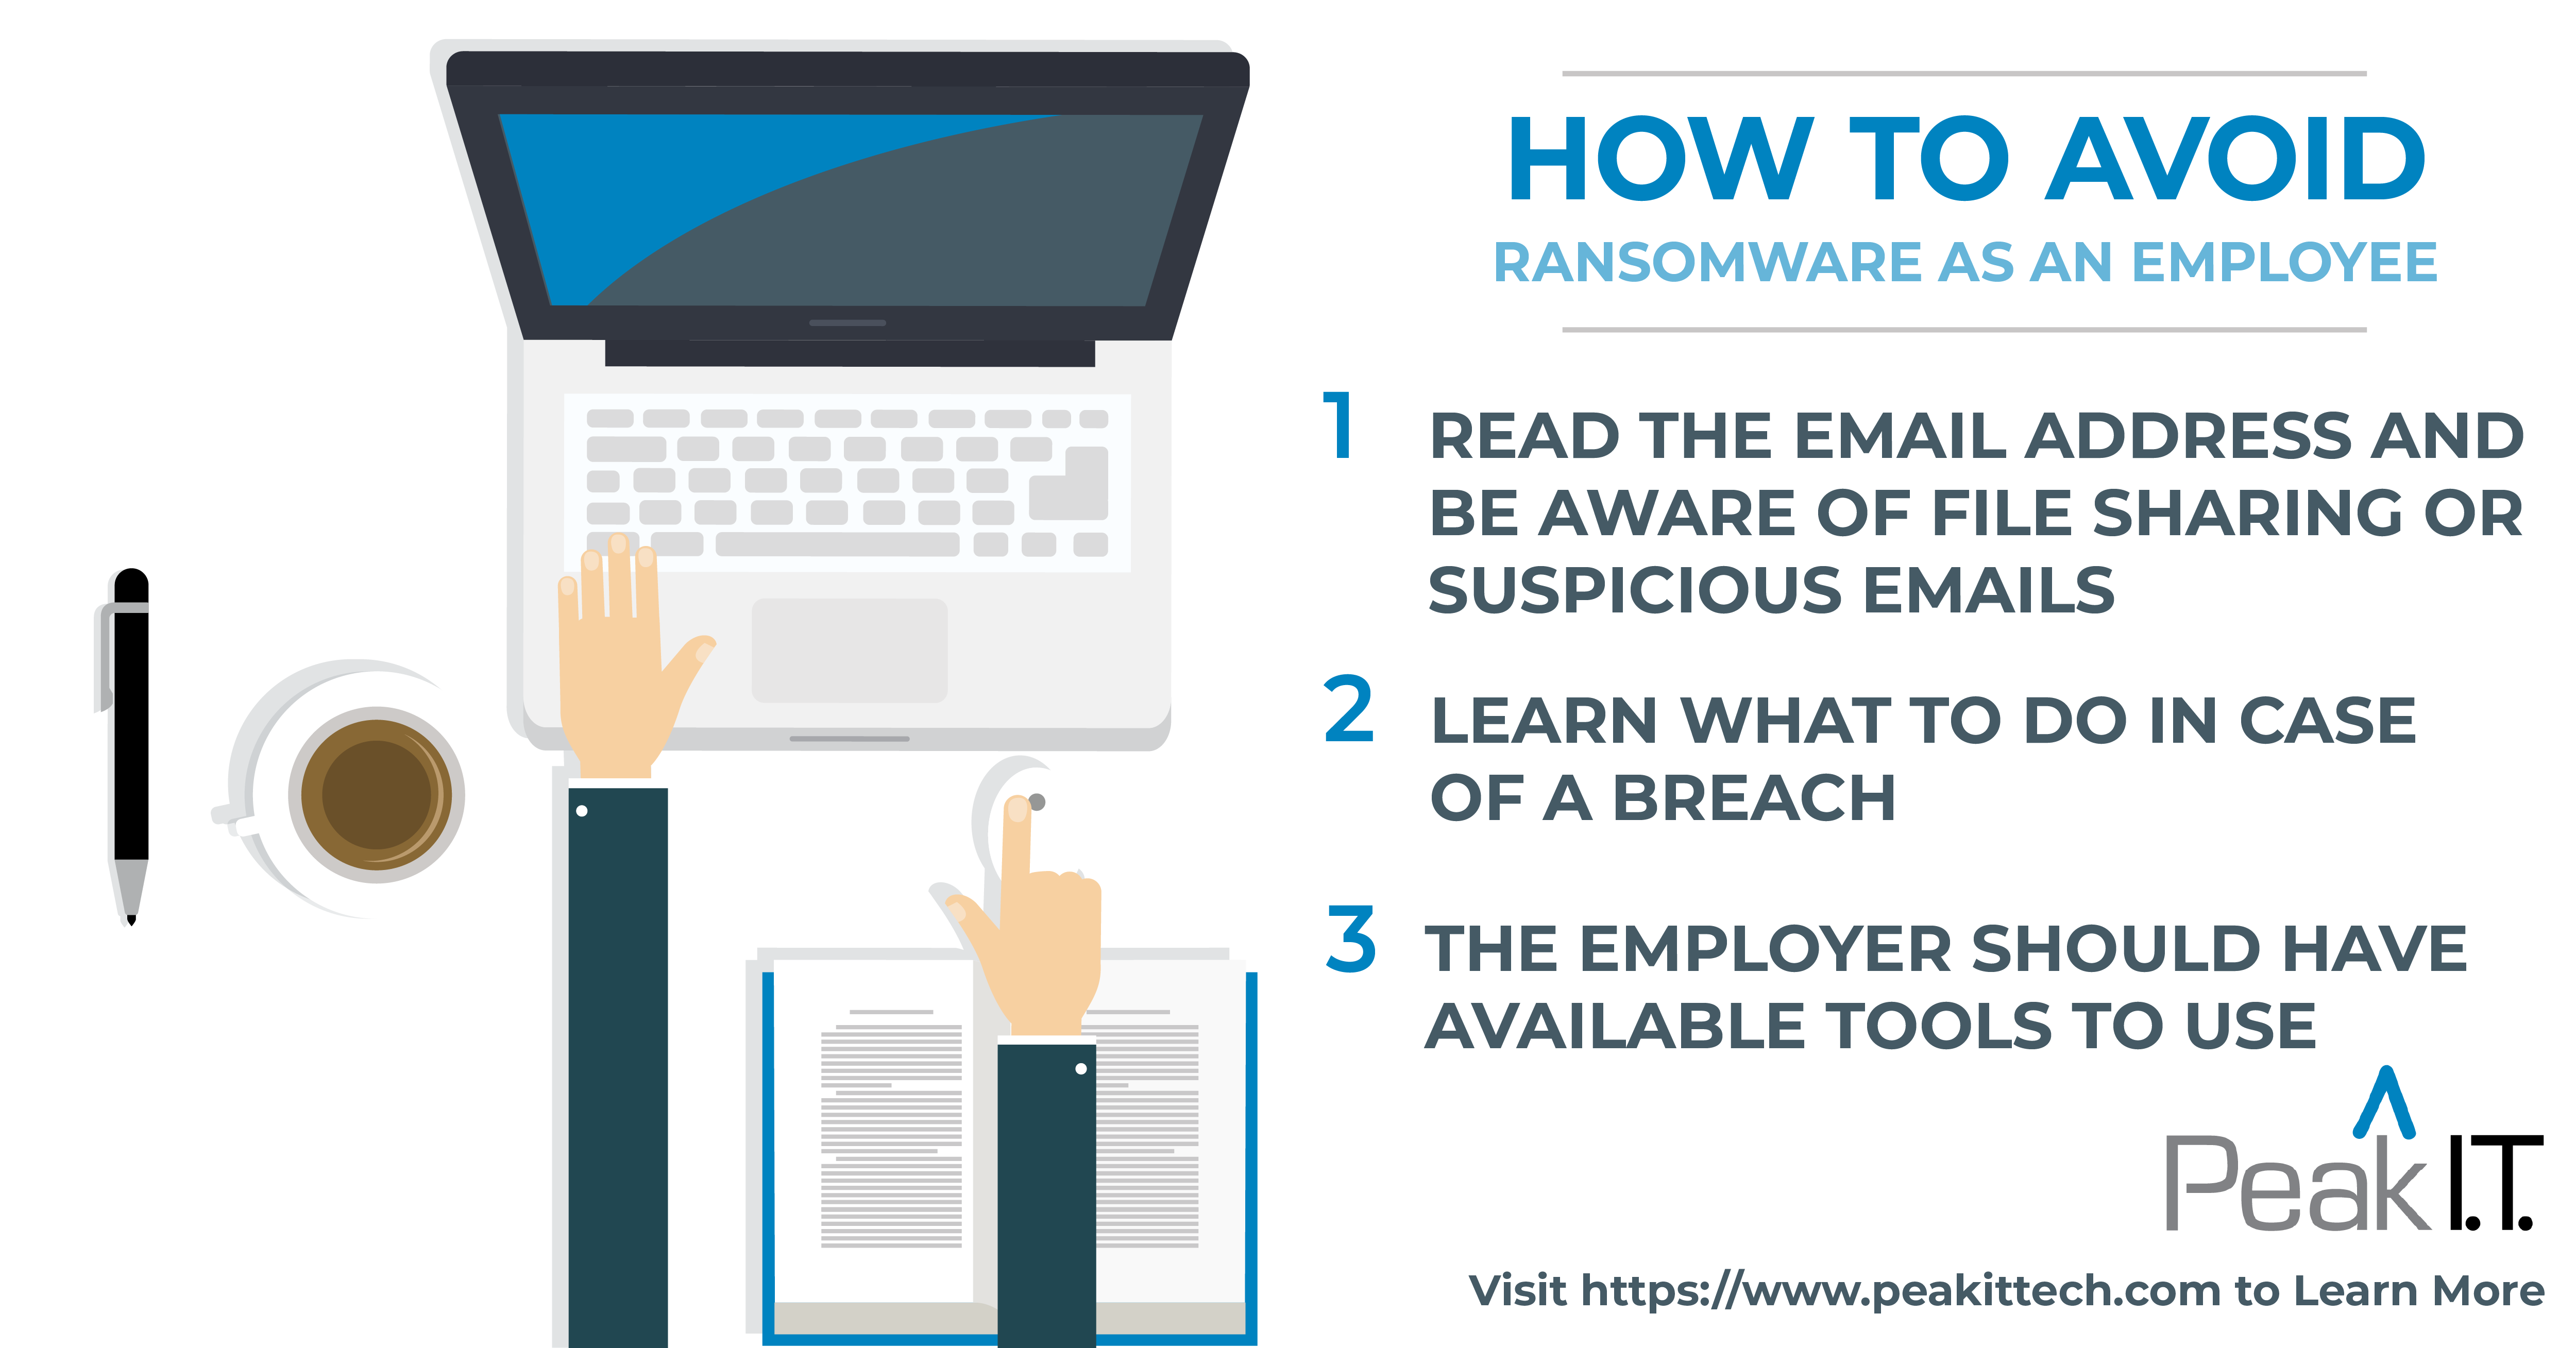 How to Avoid Ransomware as an Employee